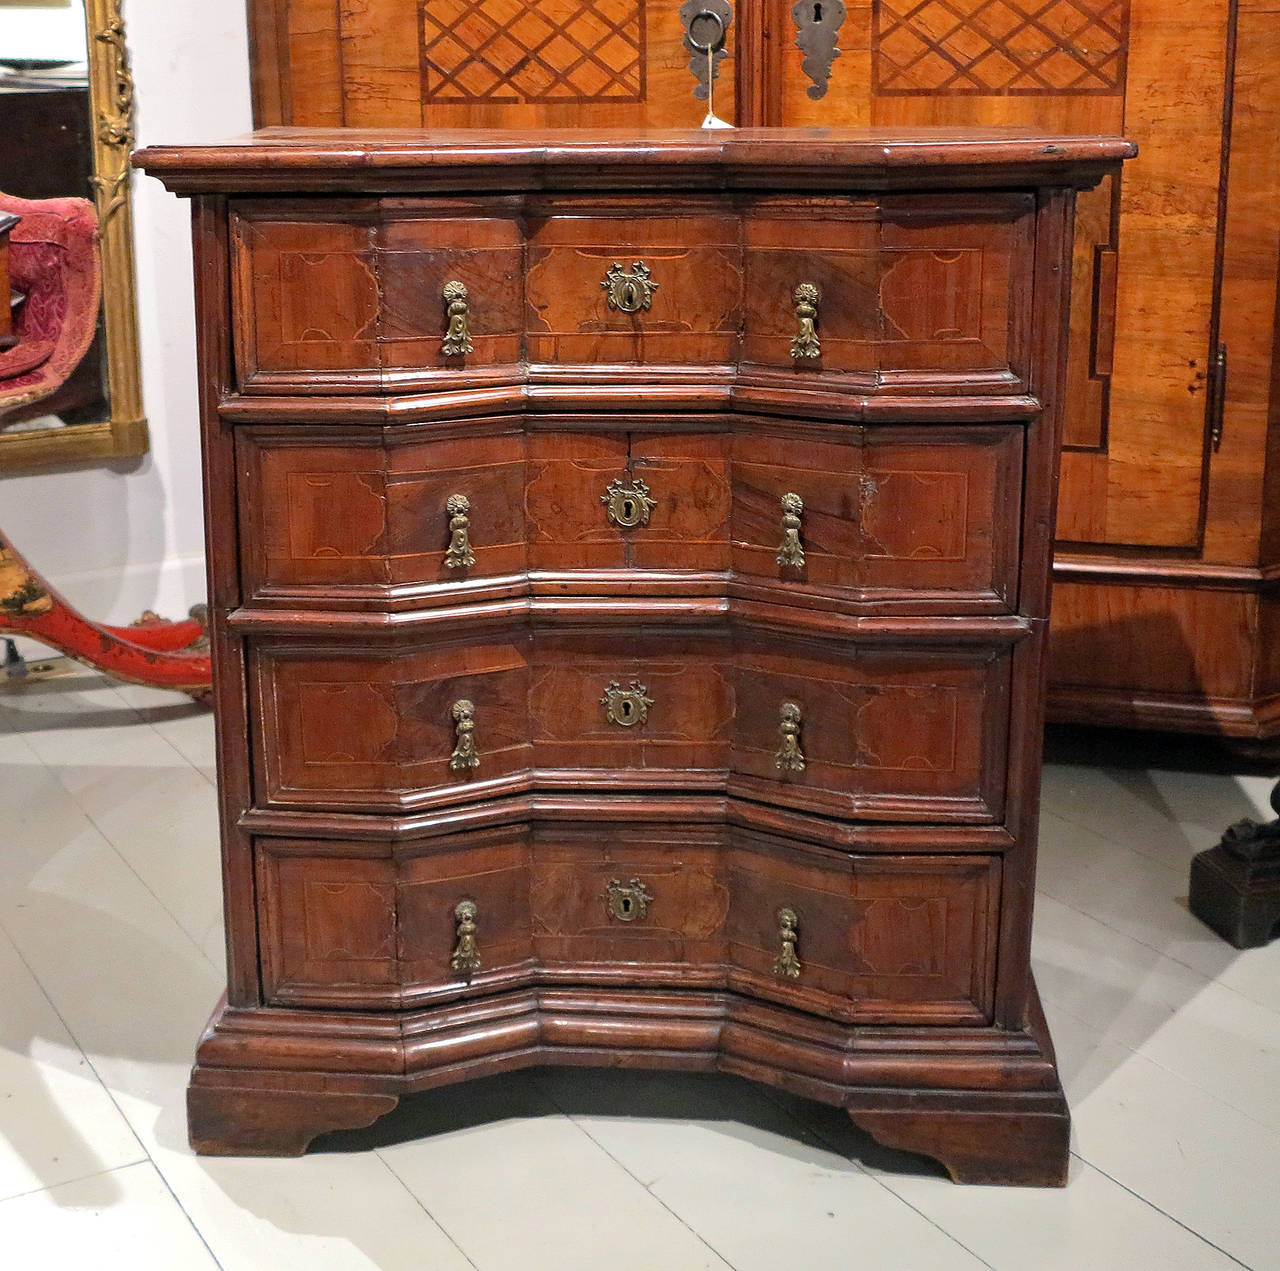 A Walnut & Inlaid Comodino Ferrarese
Late 17th Century 
Italy

A tasty piece of furniture with an accentuated movement of the front.
At the end of the seventeenth century craftsman Emilia , following the evolution of taste that tended to mitigate